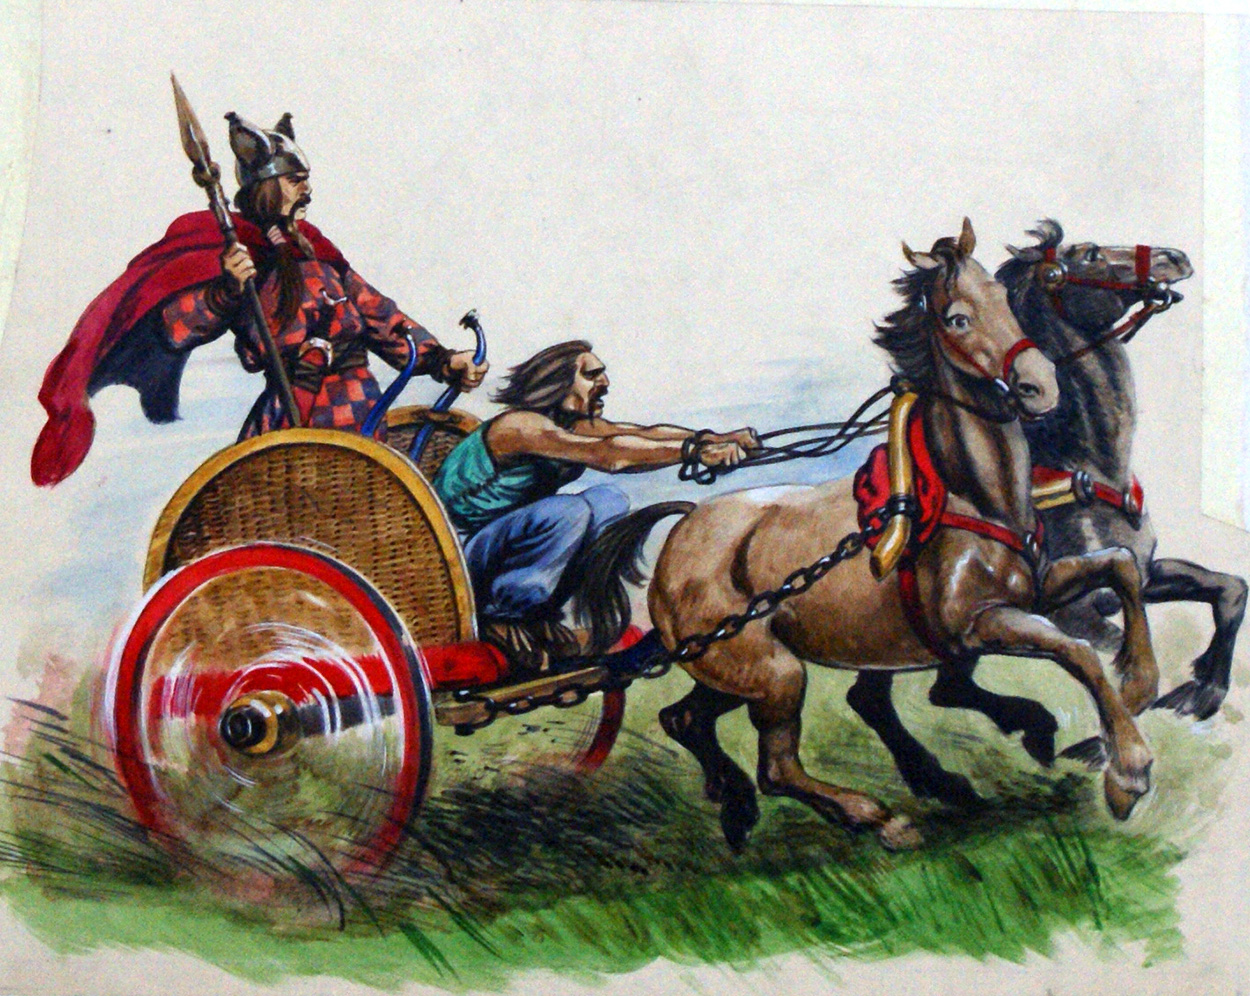 A Celtic Chariot (Original) art by British History (Peter Jackson) at The Illustration Art Gallery